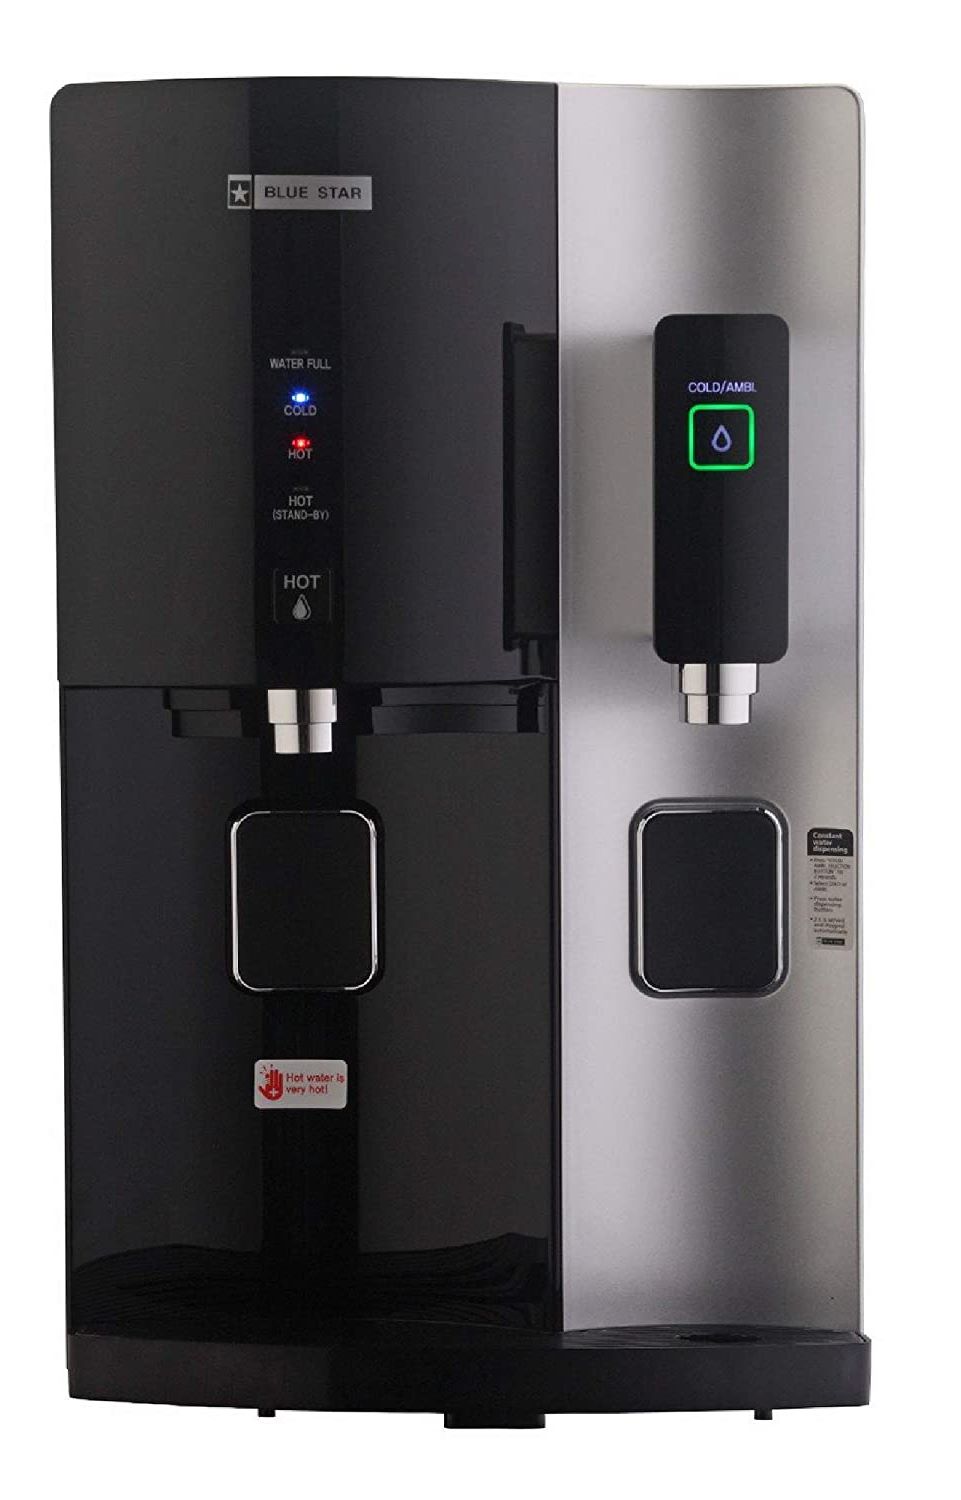 Blue Star Stella 8.2 L Hot and Cold Water Purifier RO+UV Purification